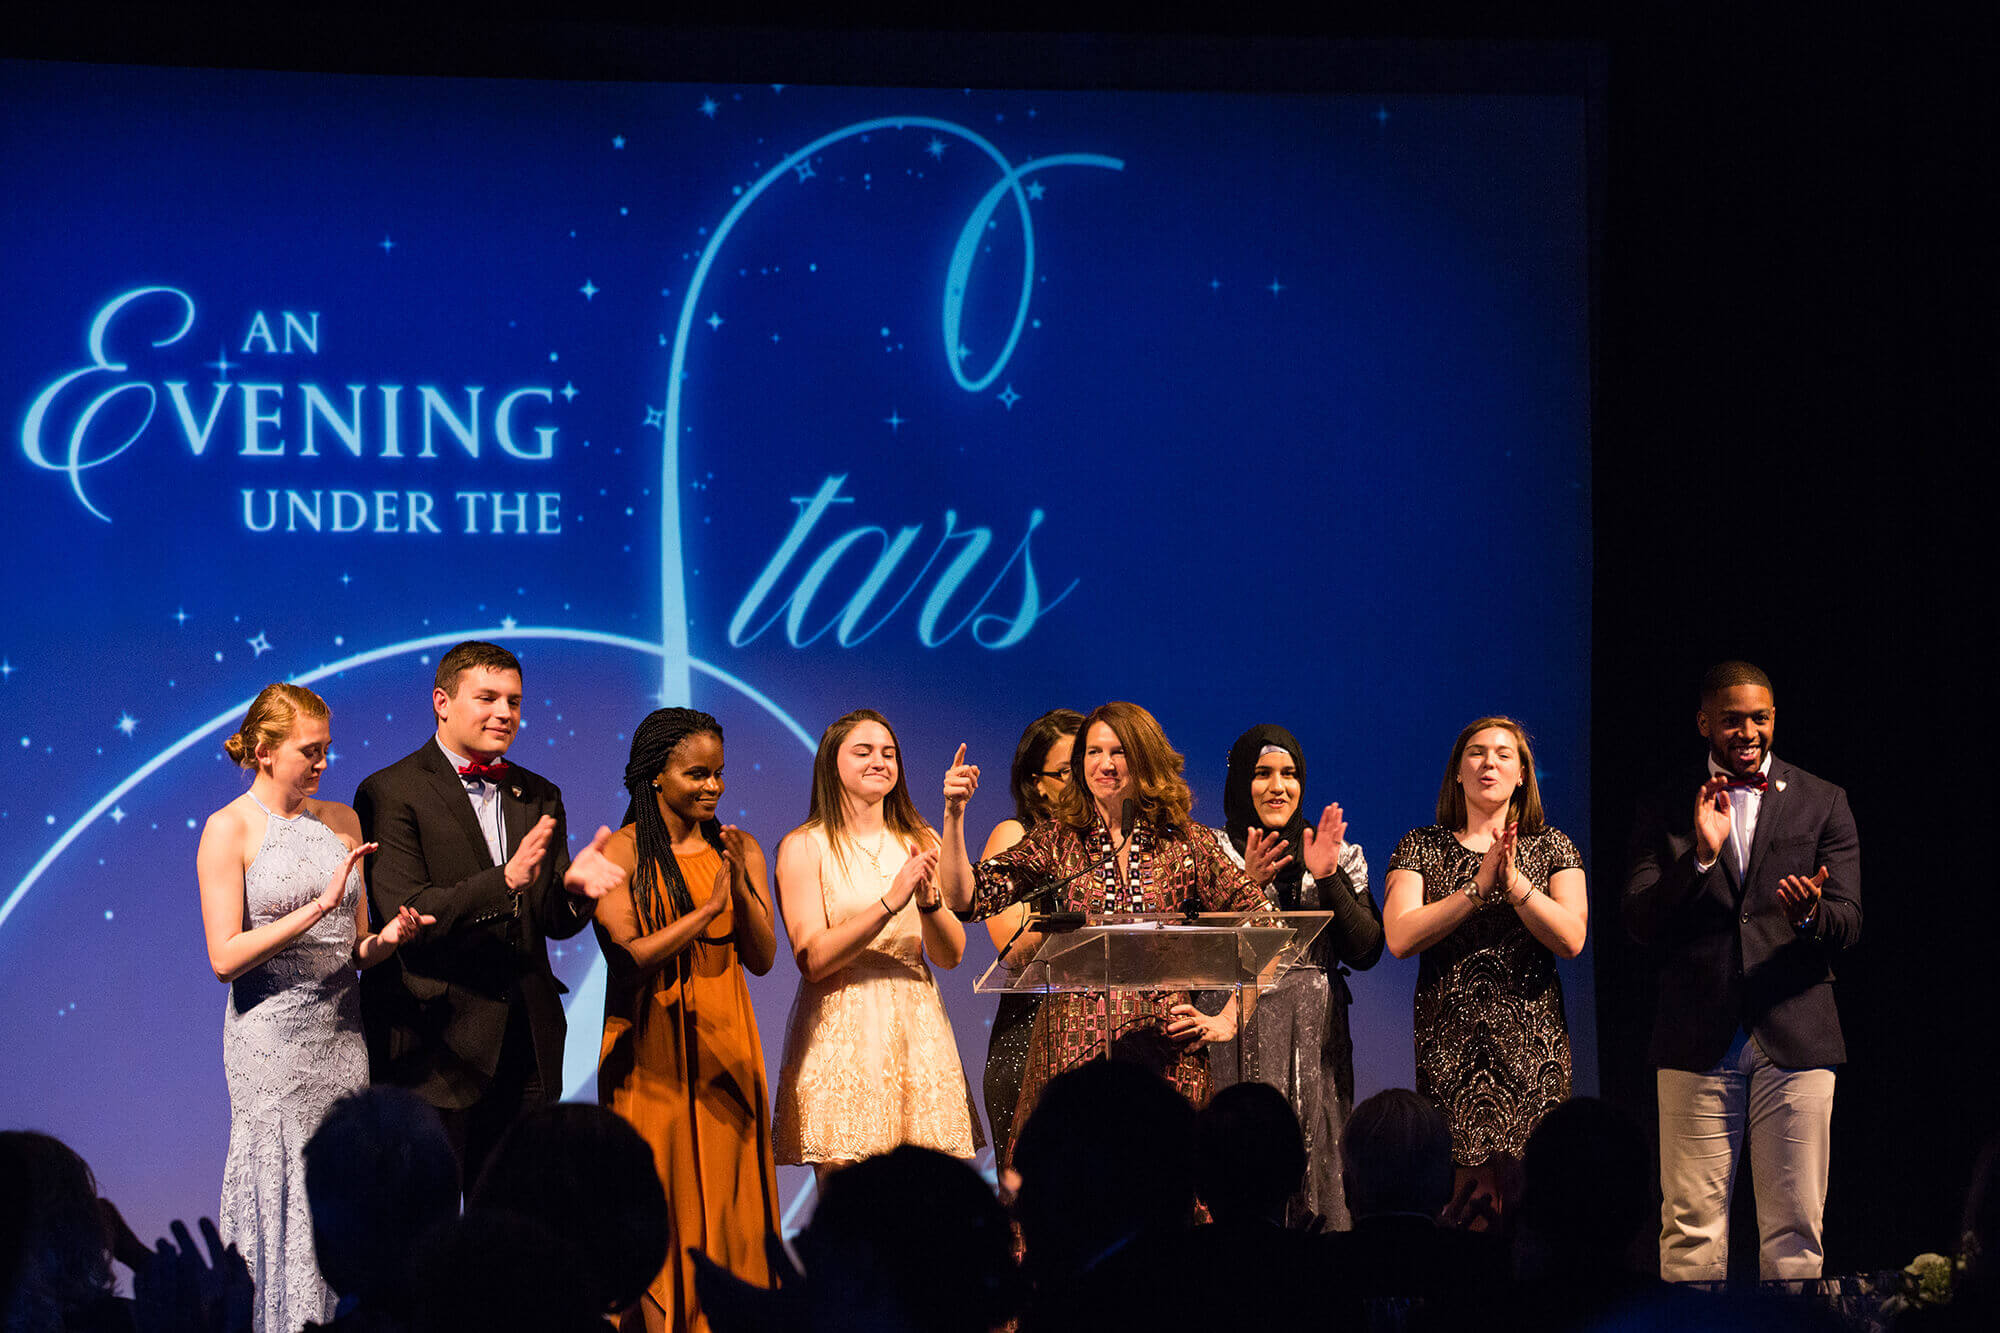 Shenandoah University Celebrates ‘An Evening Under the Stars’ First fundraising event in the James R. Wilkins, Jr. Athletics & Events Center raises more than $1 million for scholarships